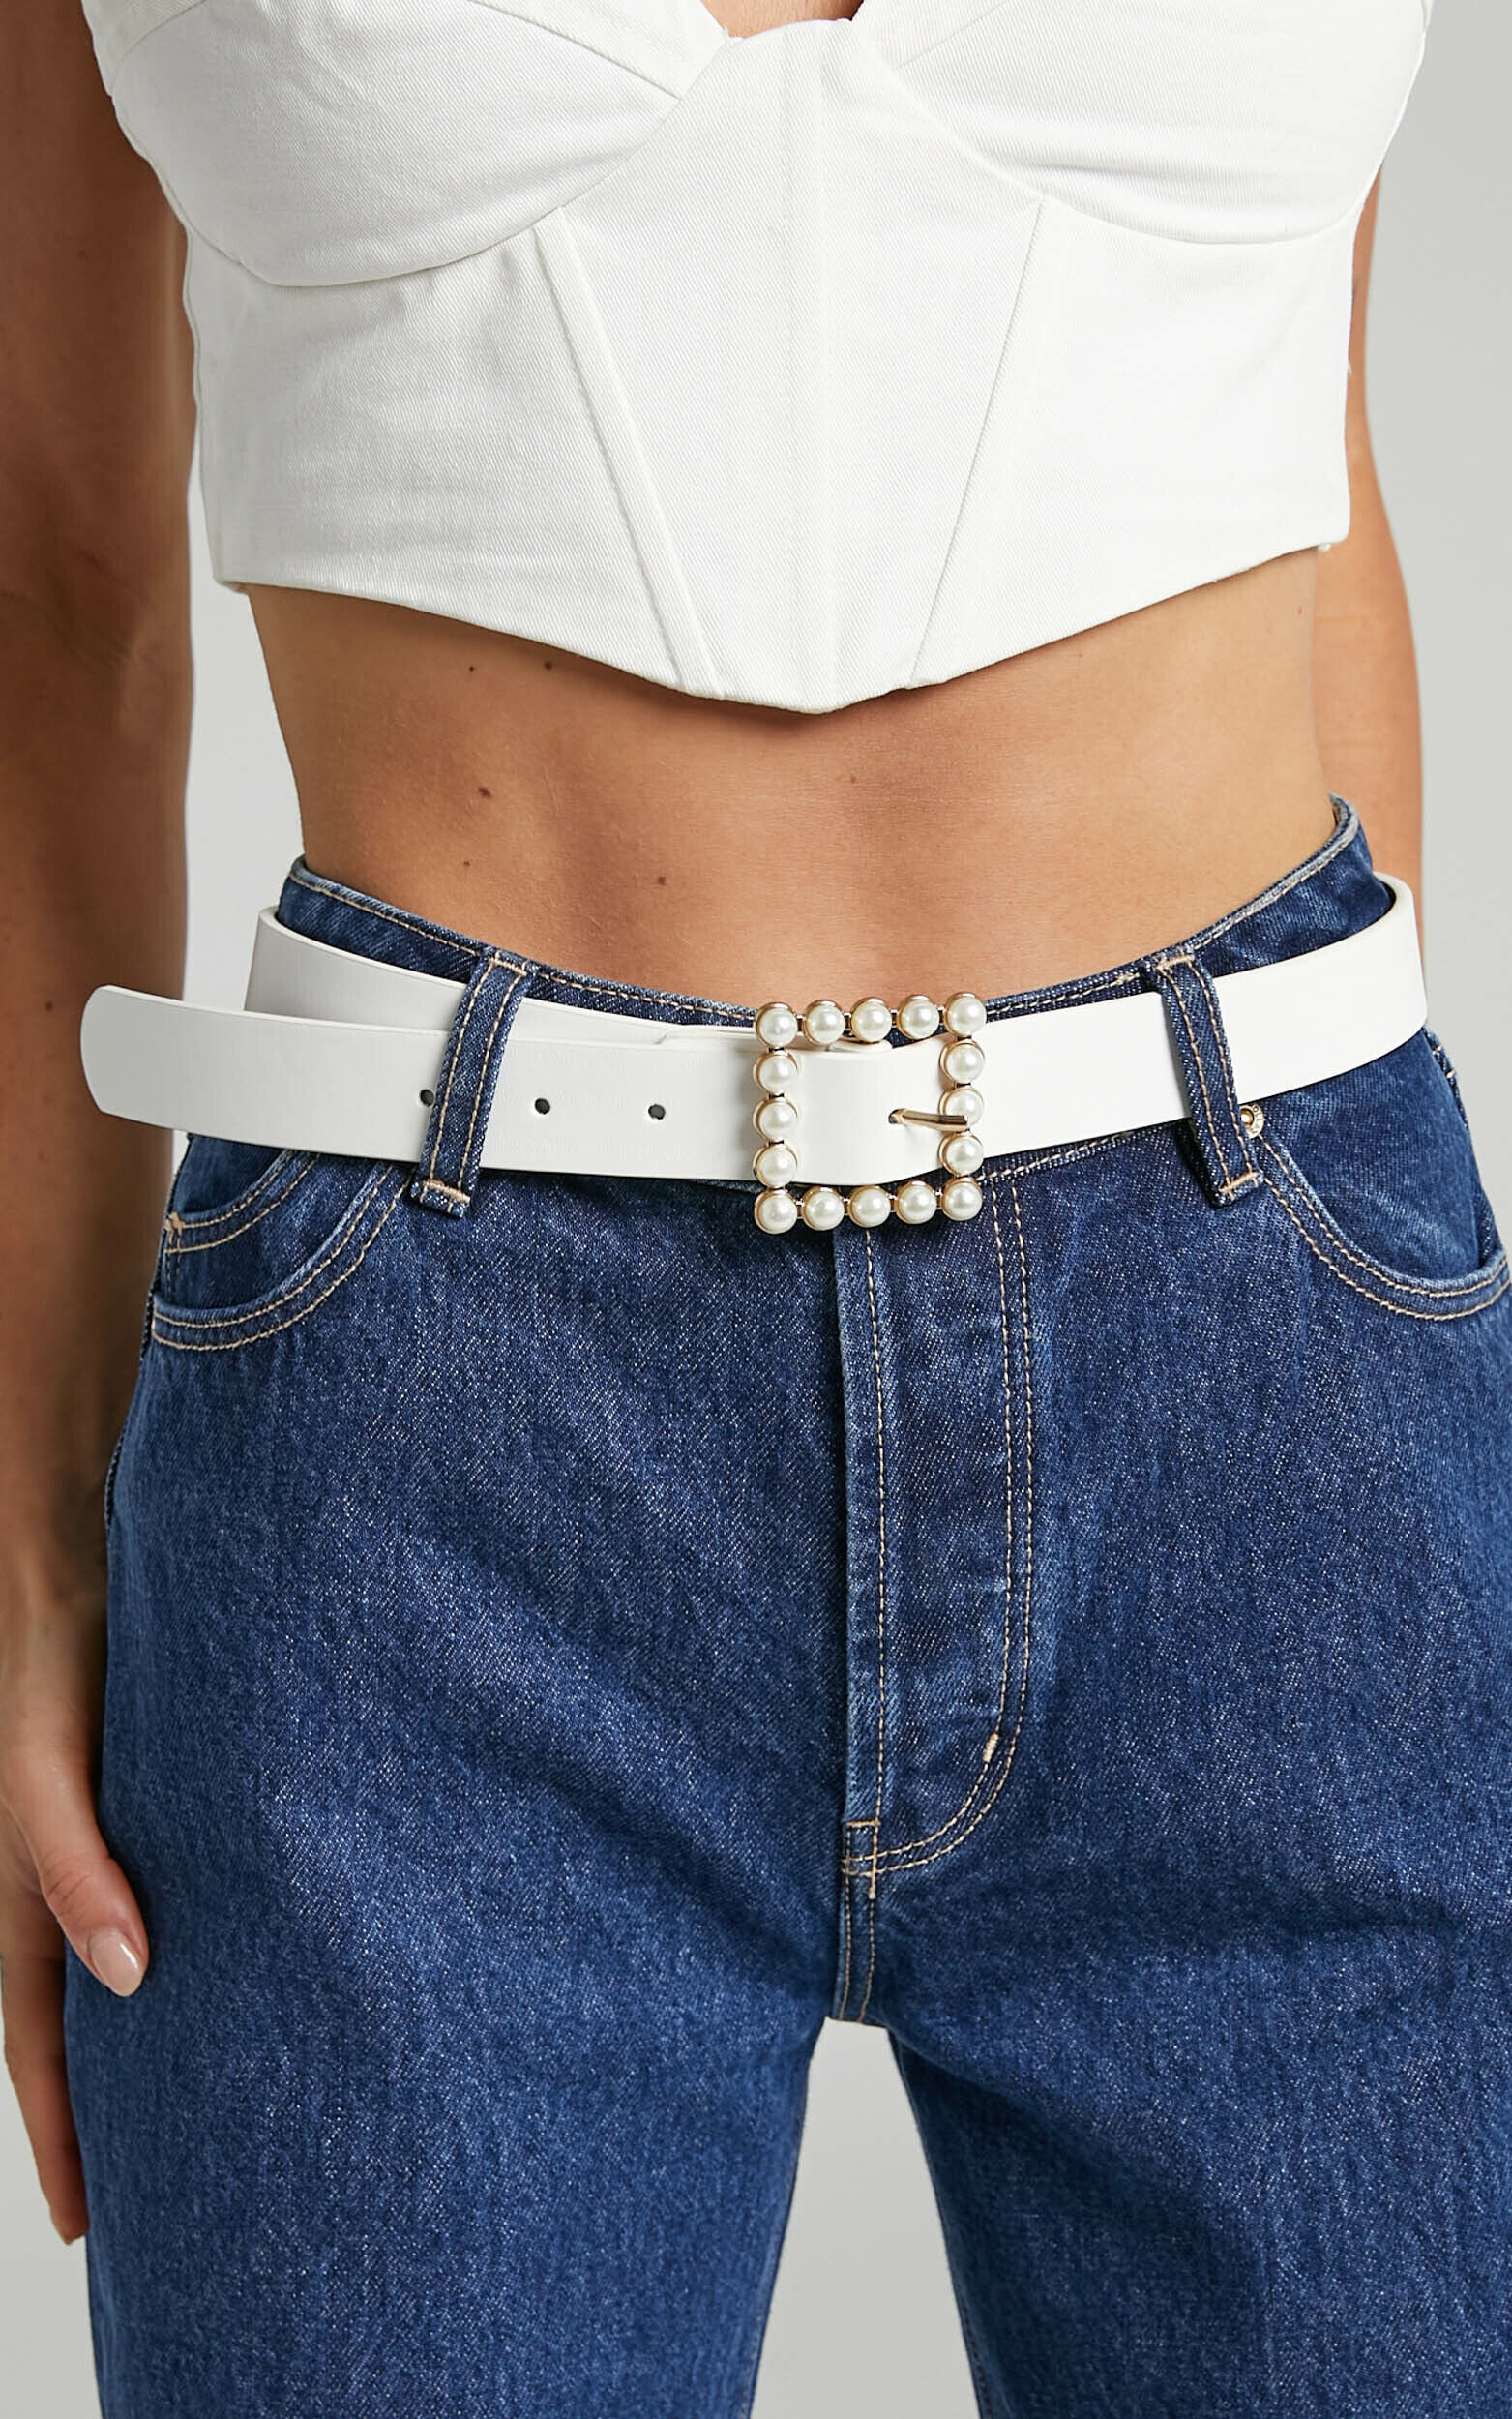 Lausanne Square Pearl Buckle Belt in White - NoSize, WHT2, super-hi-res image number null